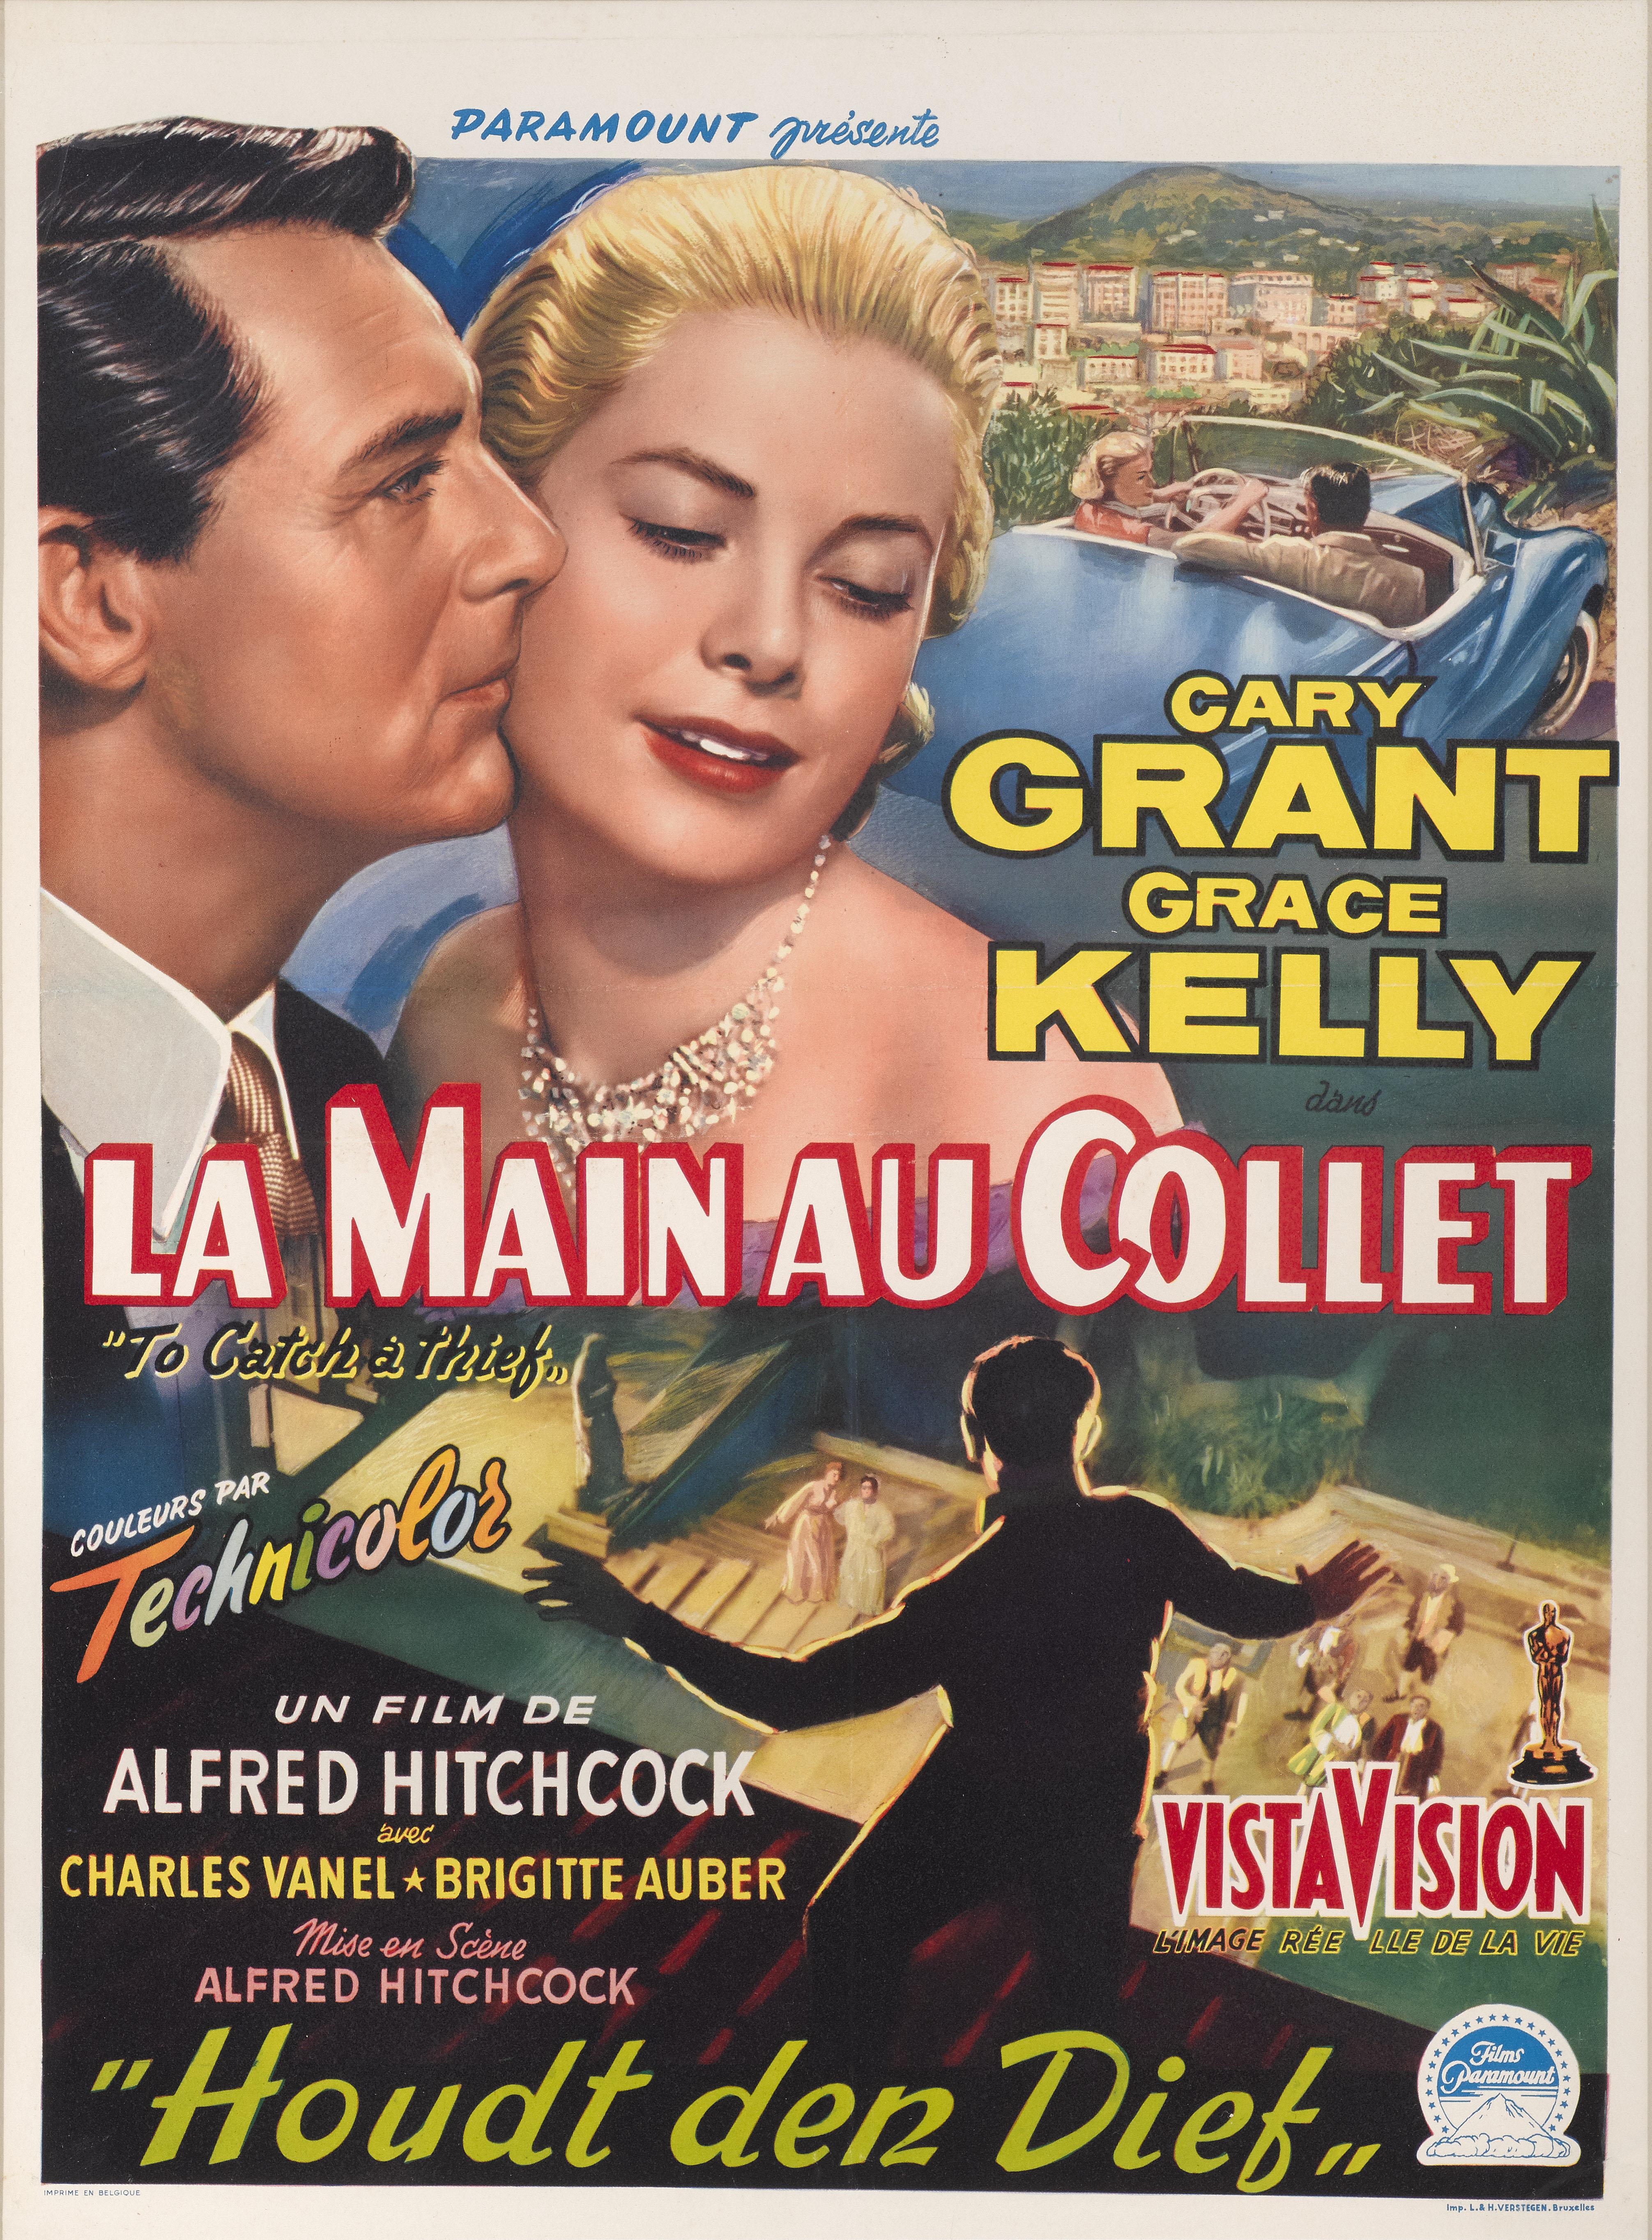 Original Belgian film poster for Alfred Hitchcock's 1955 Classic romantic thriller starring Cary Grant and Grace Kelly.
The film won an Oscar for best cinematography (Robert Burks).
This poster is conservation paper backed and conservation framed